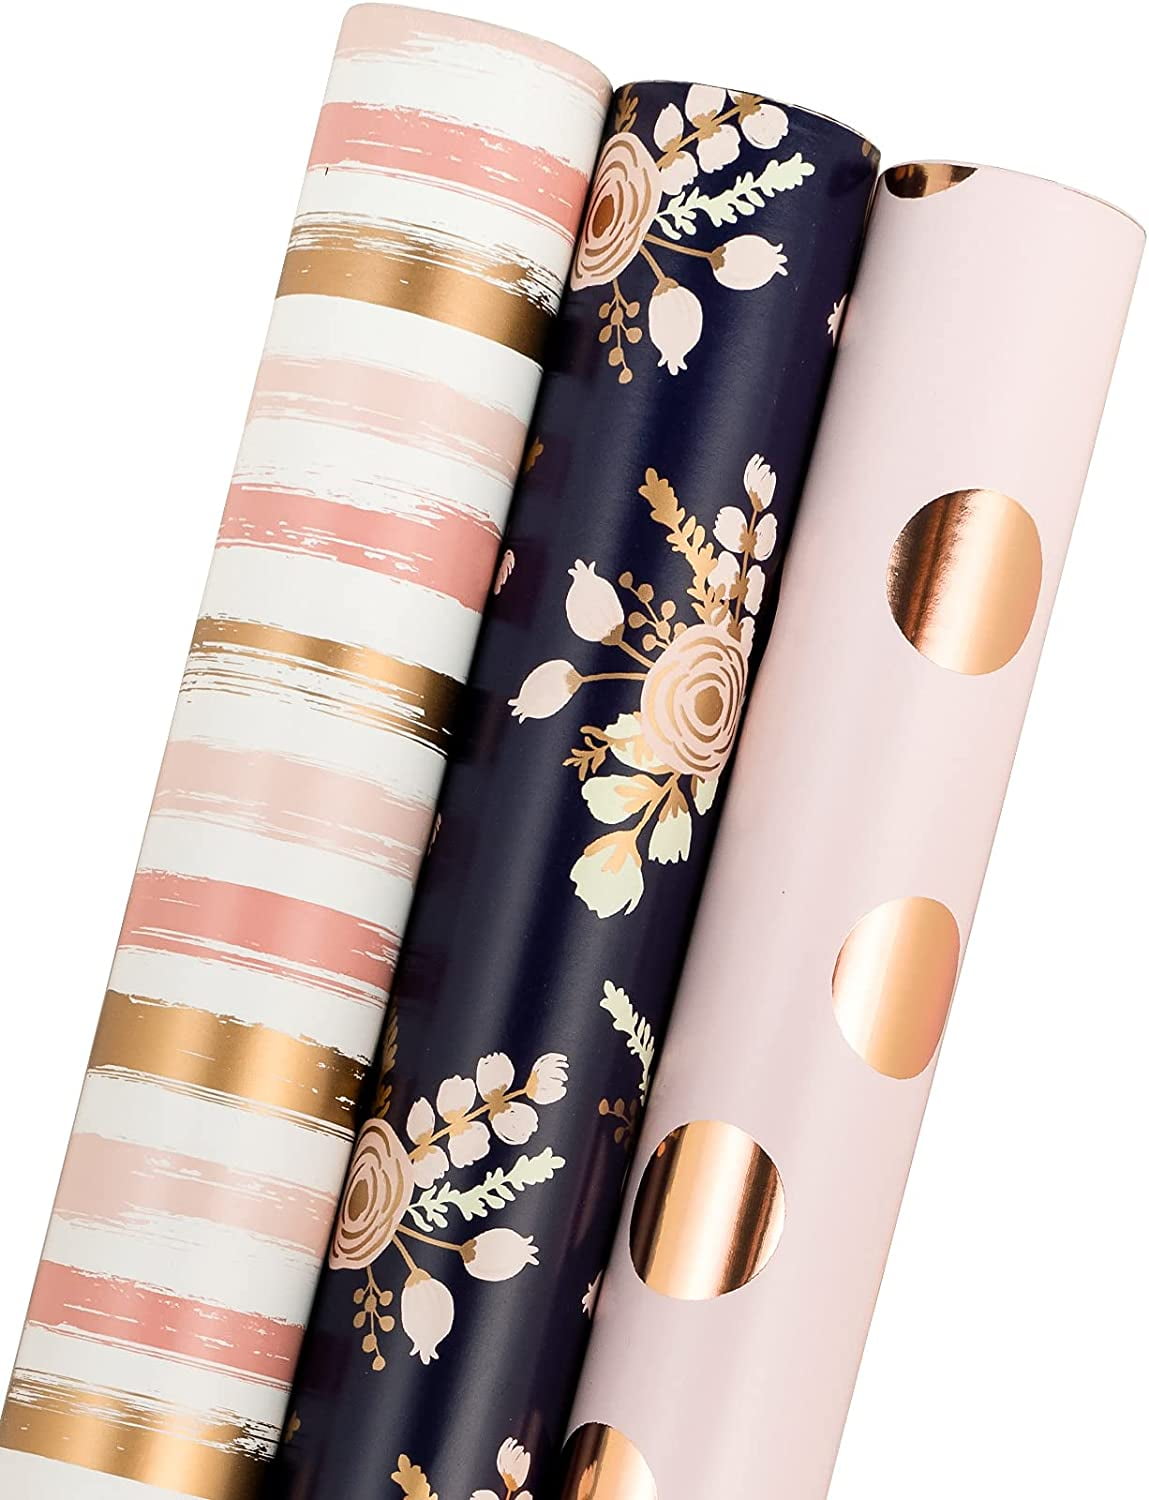 Solid Matte Pink/Silver/Golden Wrapping Paper - Mini Roll - 17